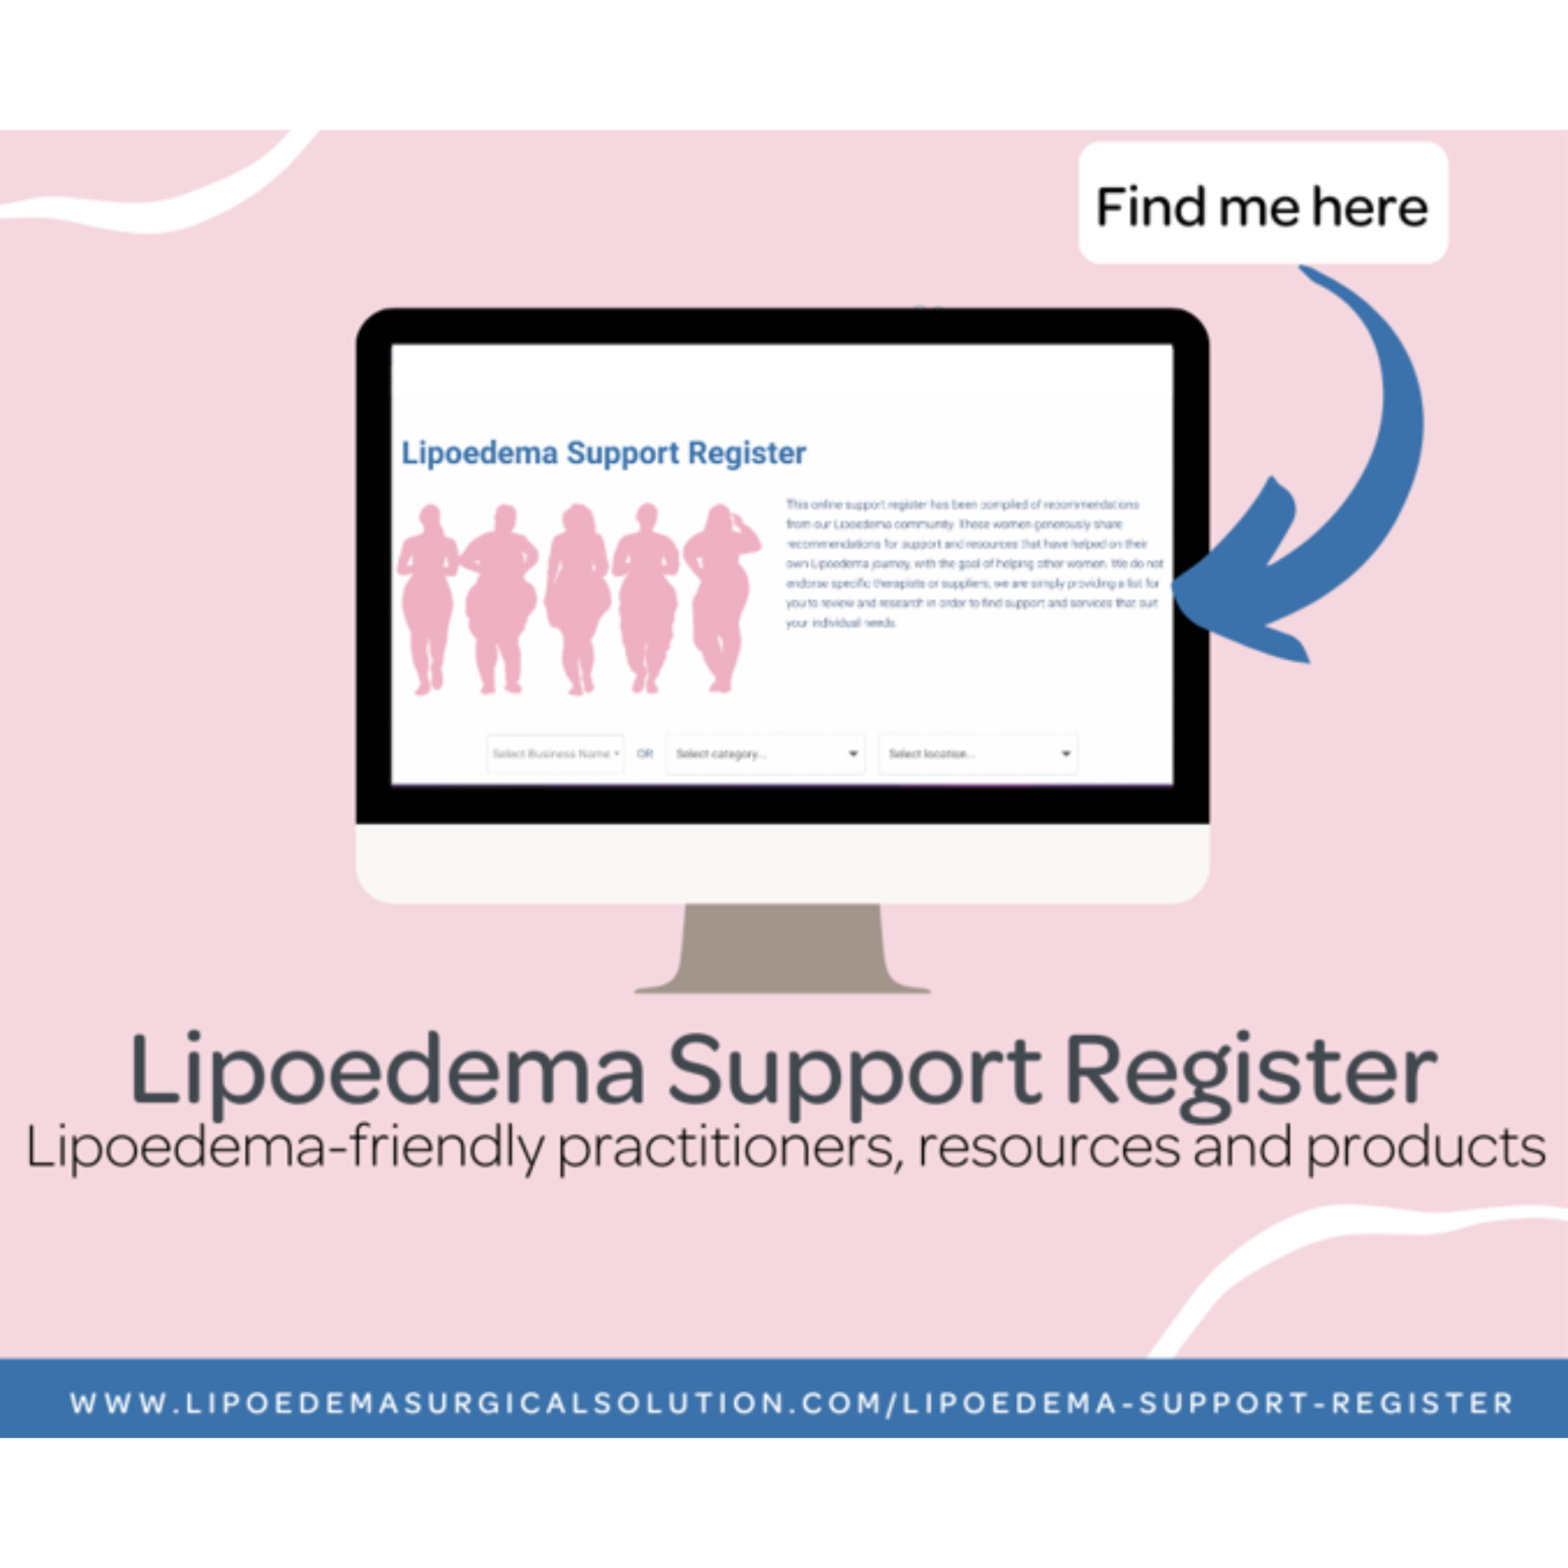 We proudly support lipoedema patients alongside Lipoedema Surgical Solution, Miami Gold Coast